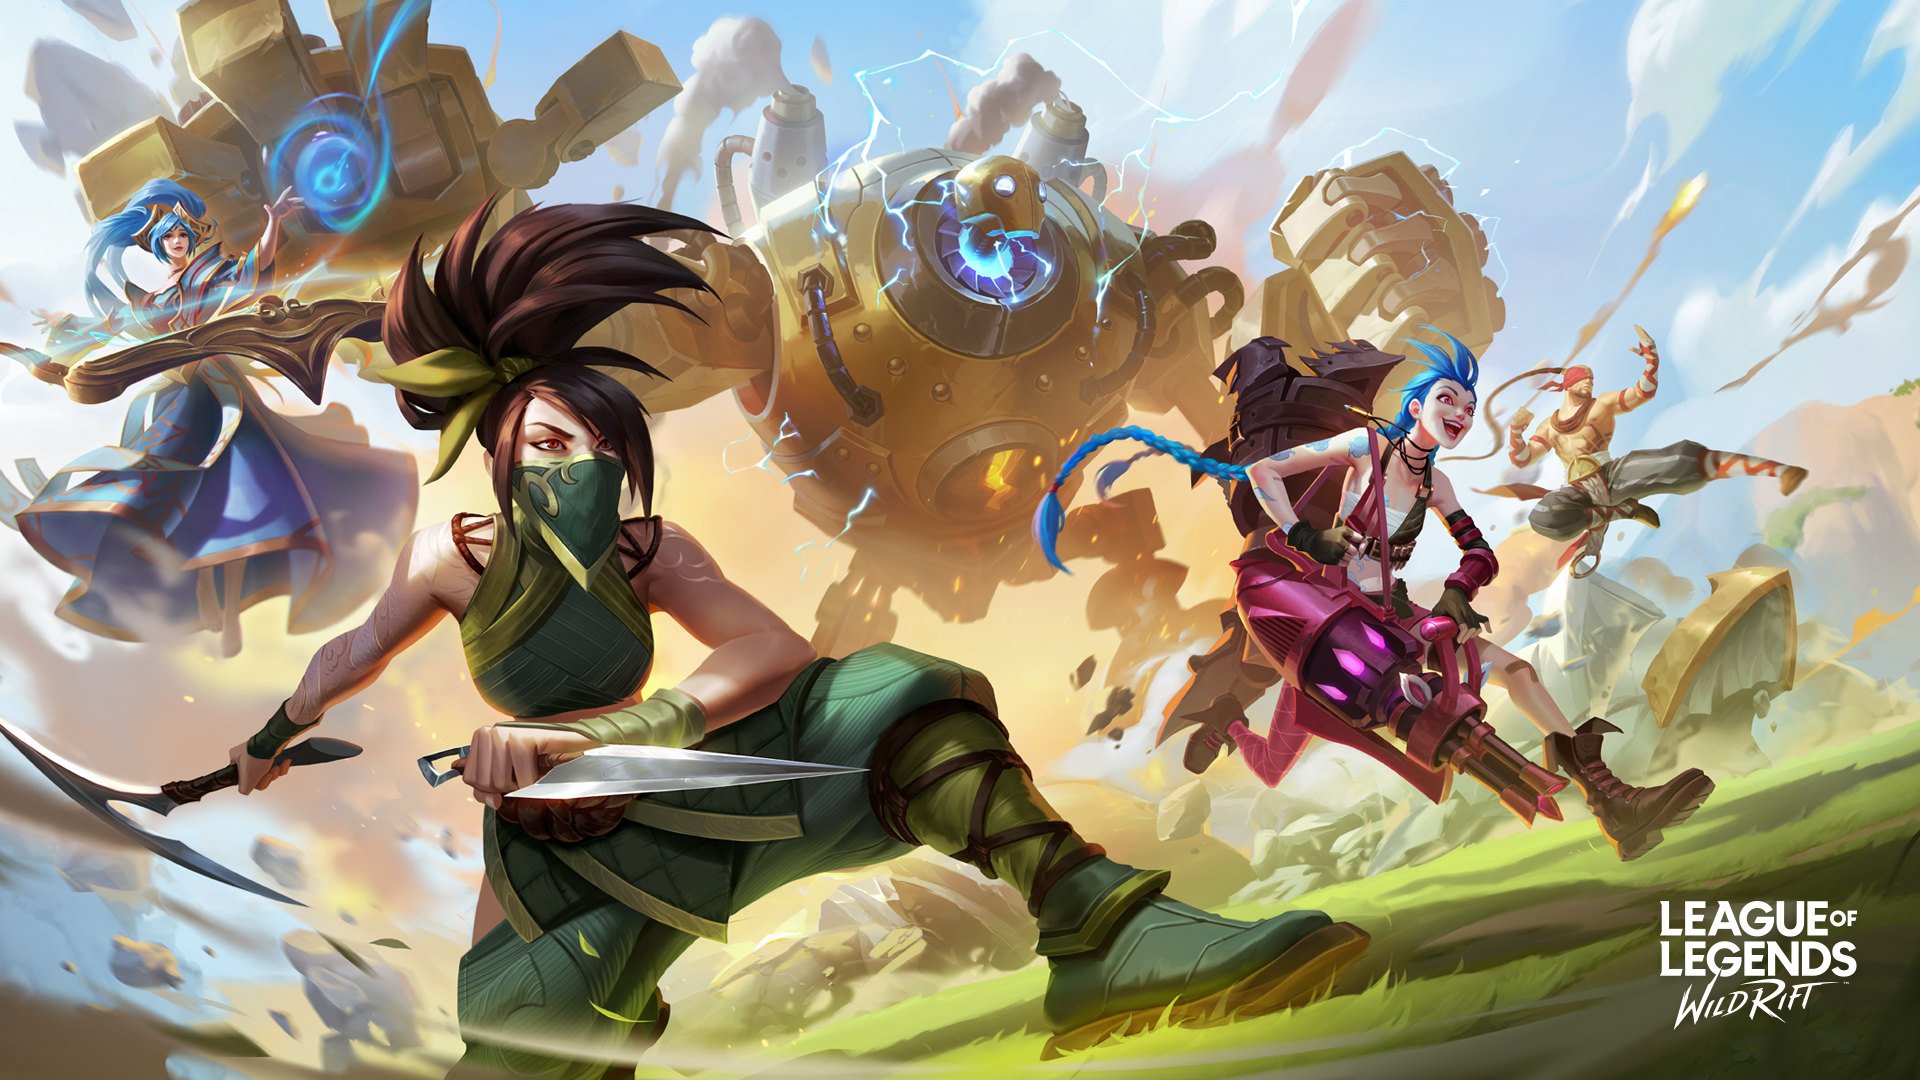 League of Legends: Wild Rift has been one of the most anticipated games in 2020. Photo: Riot Games